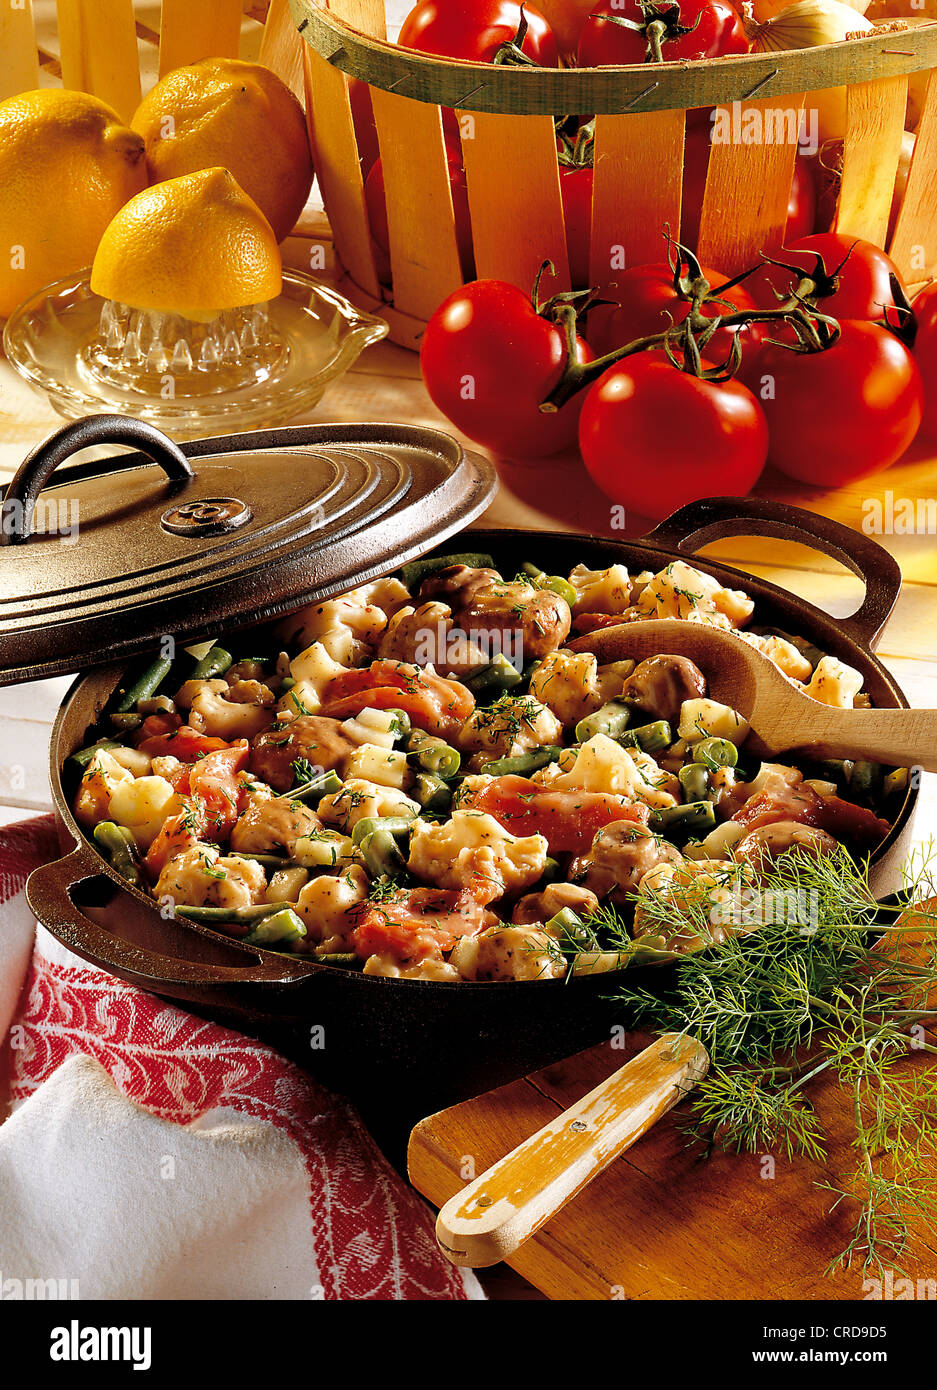 Fiery Puszta stew with tomatoes, herbs and mushrooms, vegetarian stew, Hungary. Stock Photo